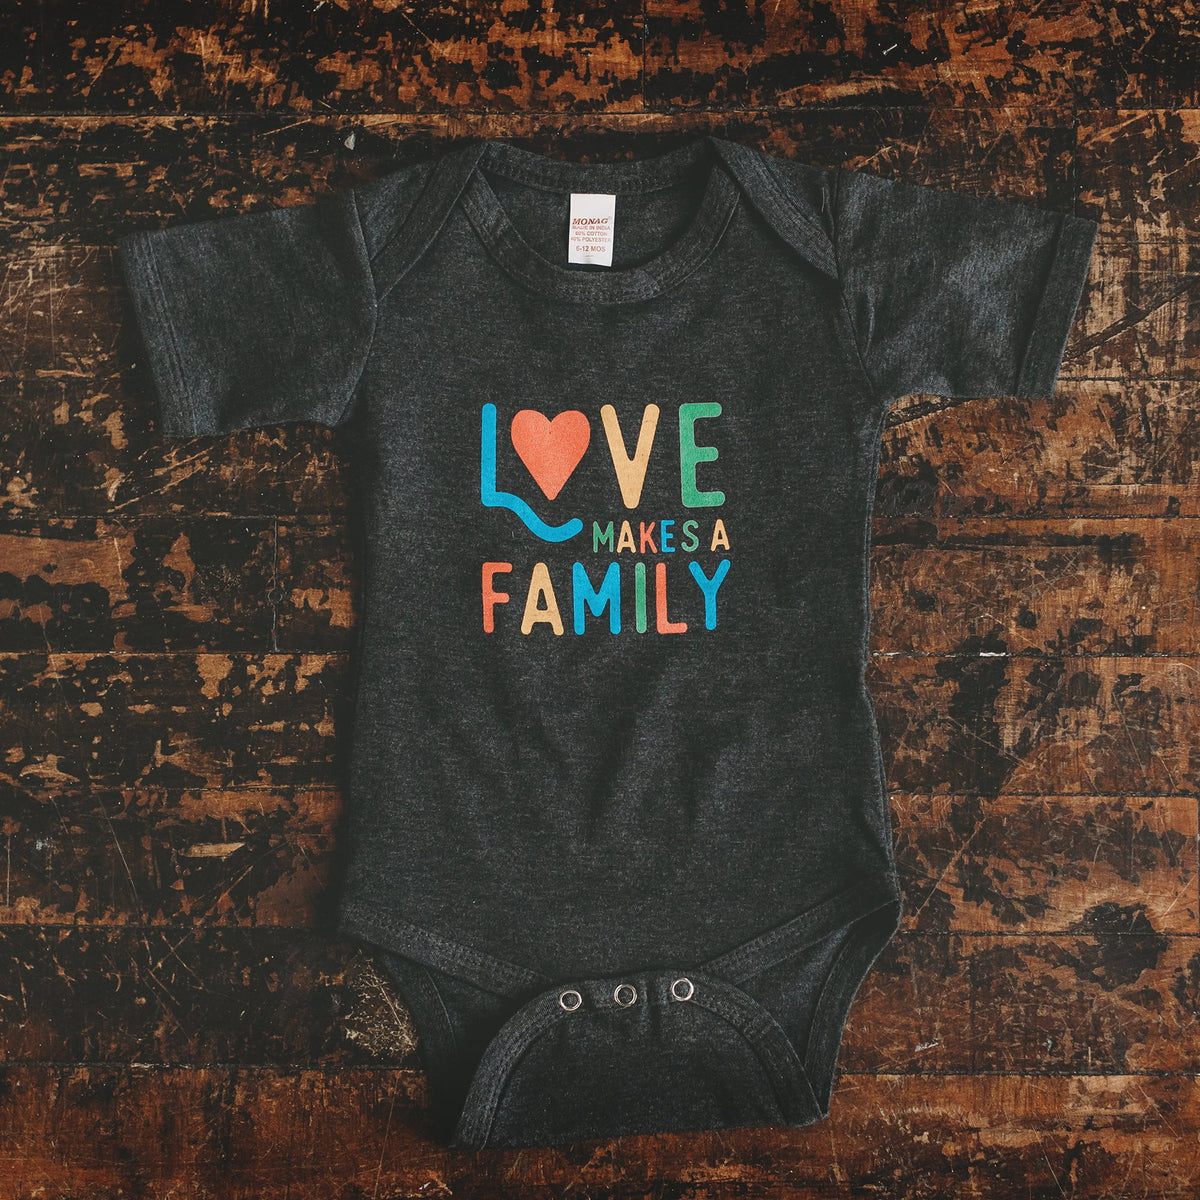 Love Makes a Family baby bodysuit / onesie - Sweetpea and Co.